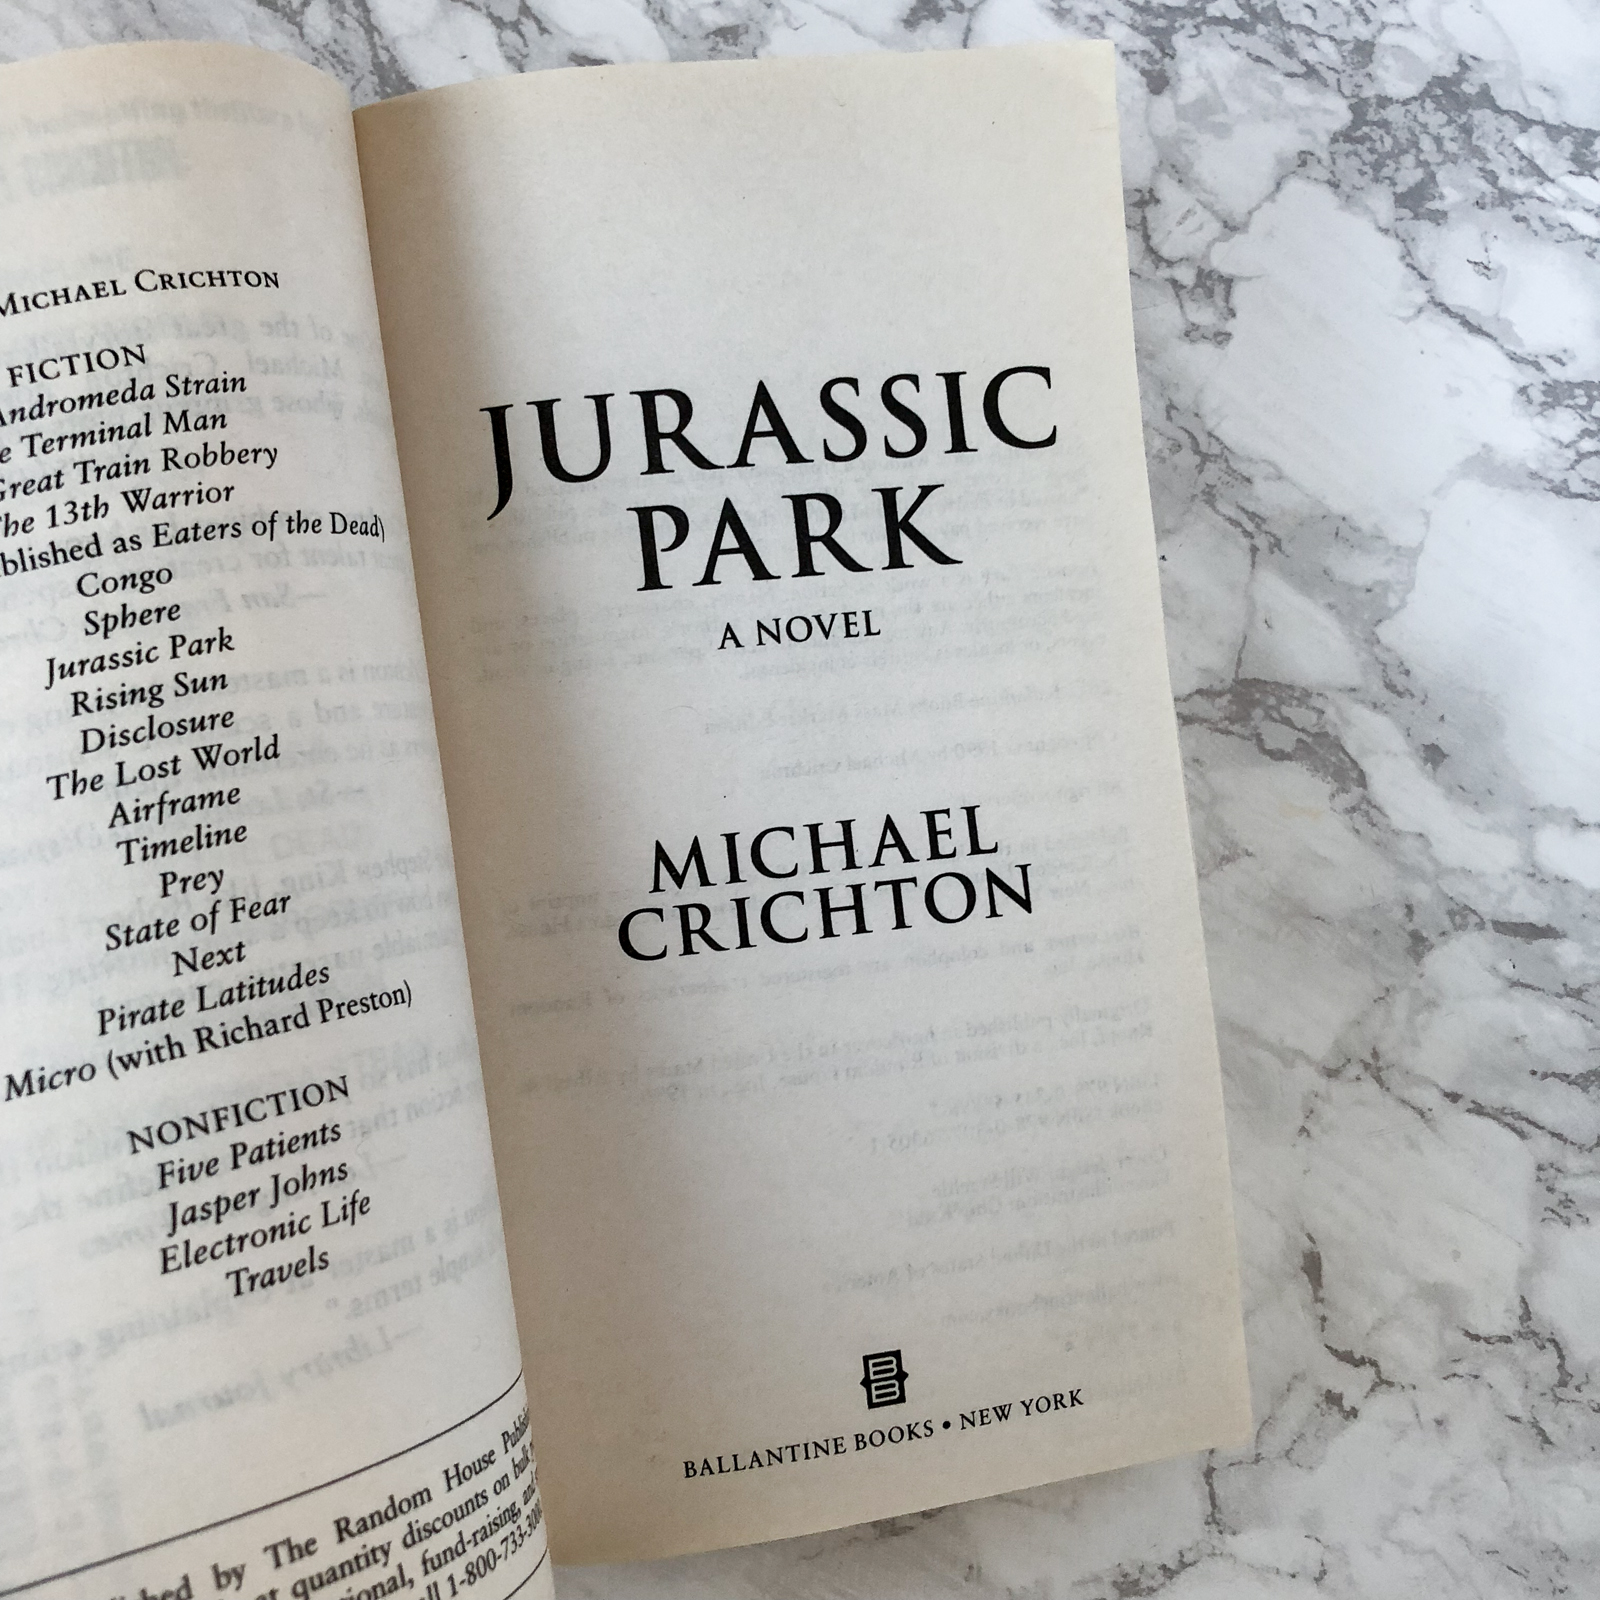 Jurassic Park & The Lost World by Michael Crichton